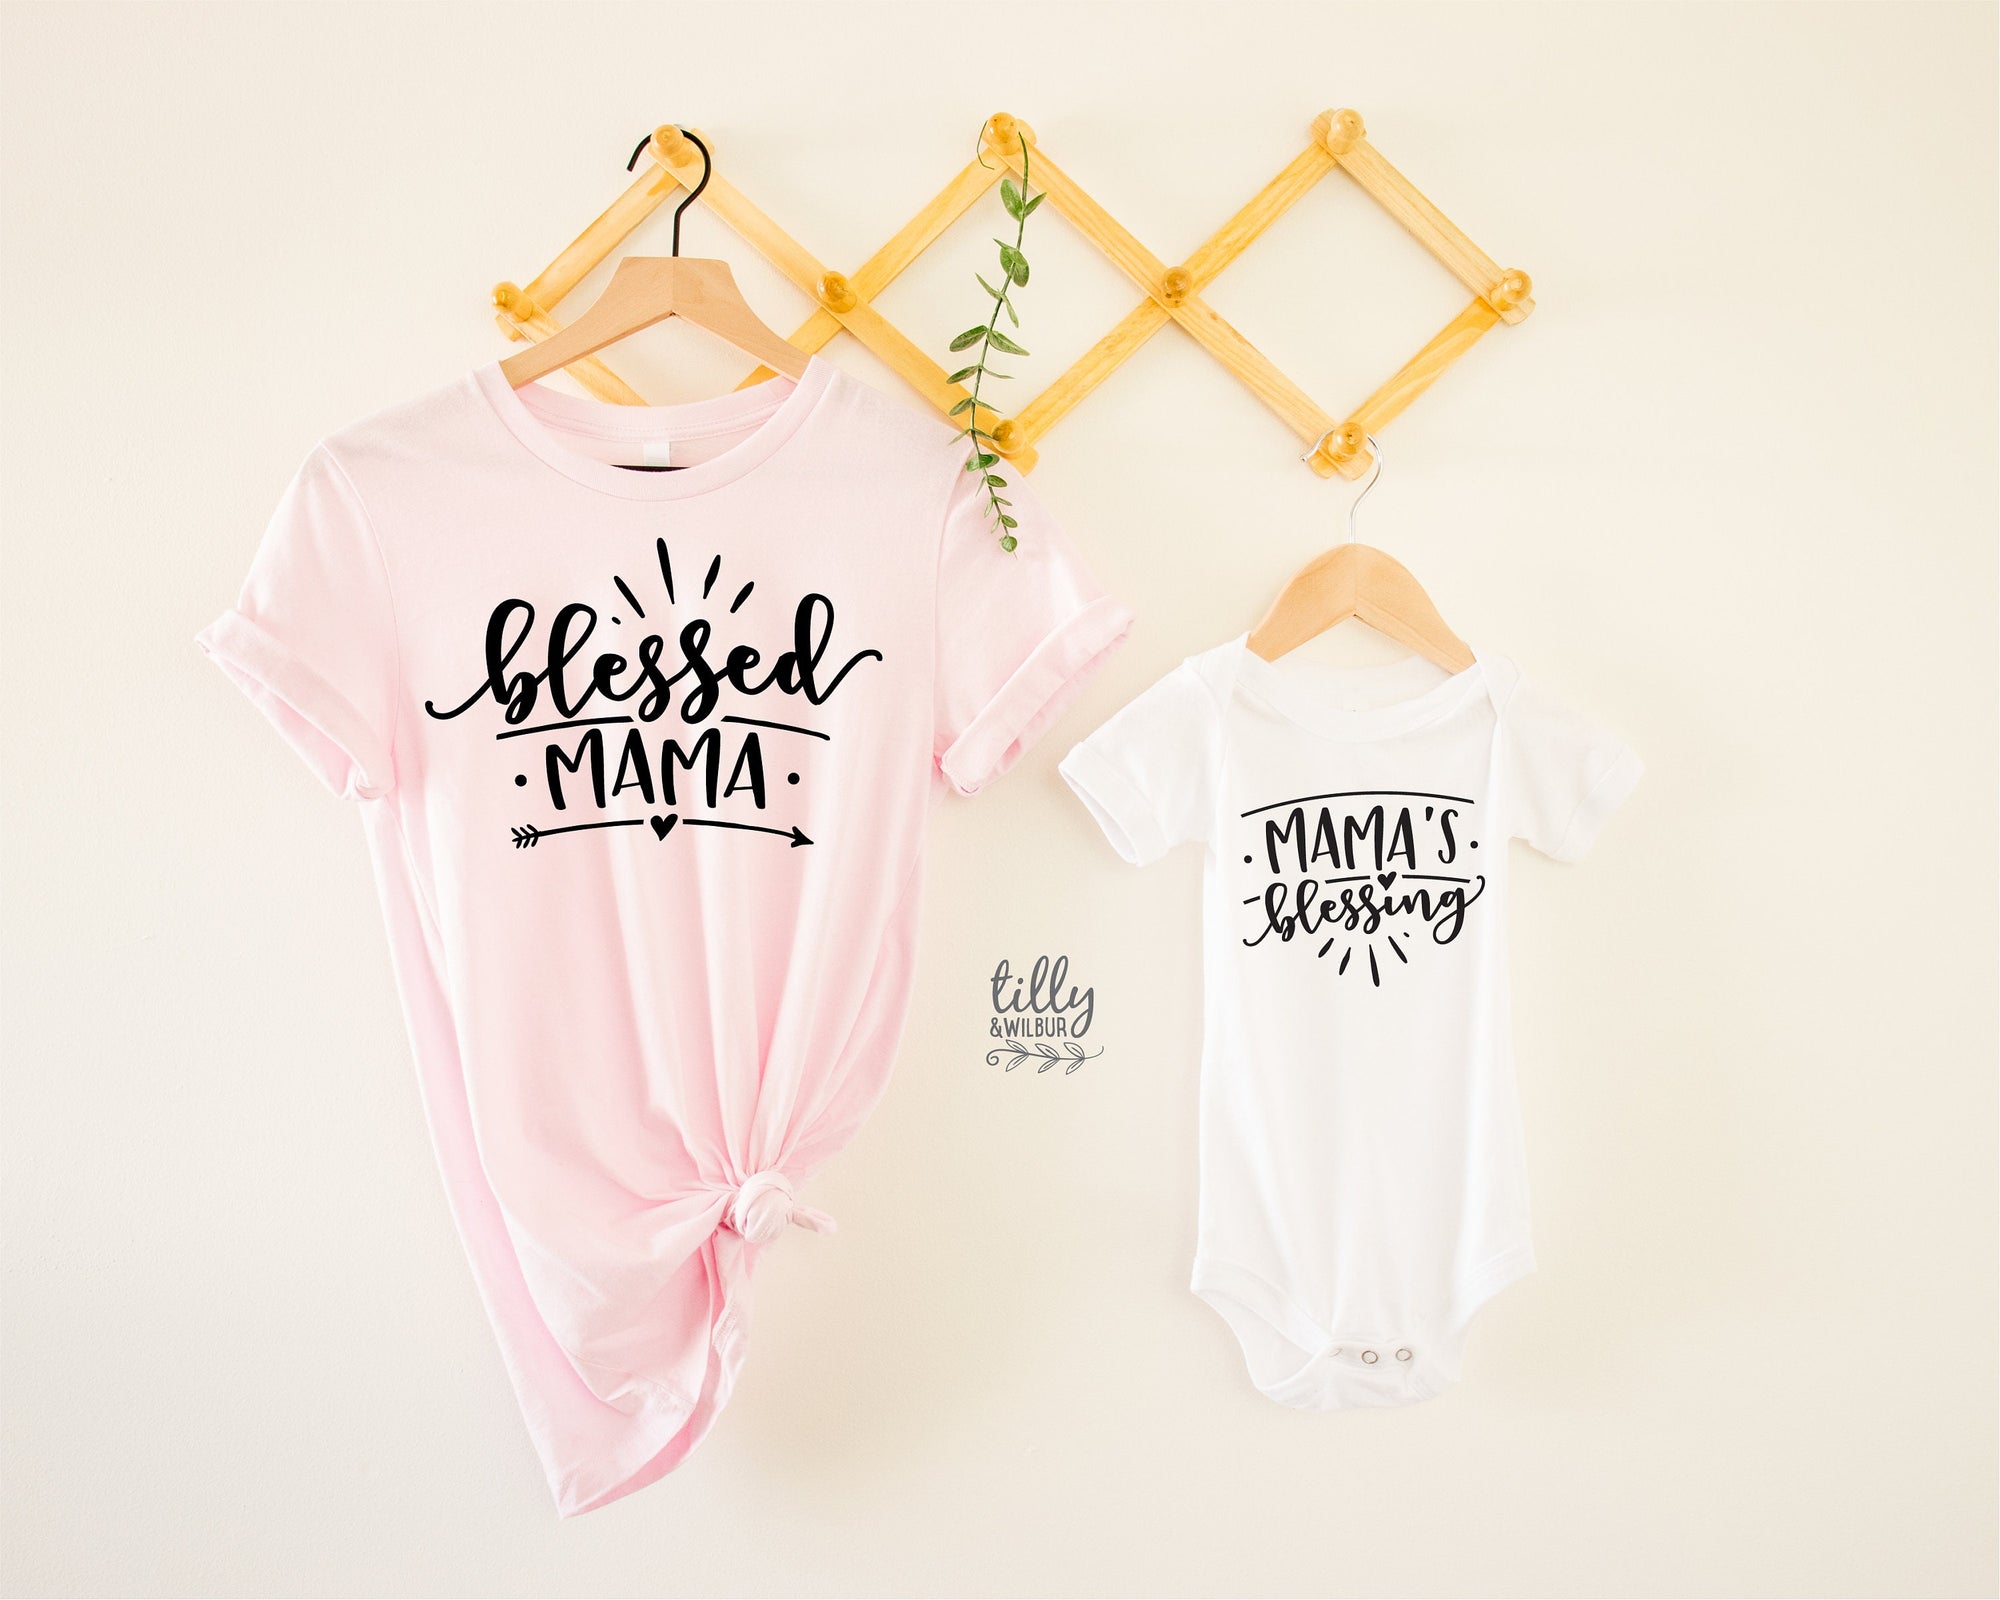 Mummy and Me Matching Shirts, Blessed Mama Shirt, Mama's Blessing, Mother Daughter, Mother Son Shirt, Baby Shower Gift, Mothers Day Gift